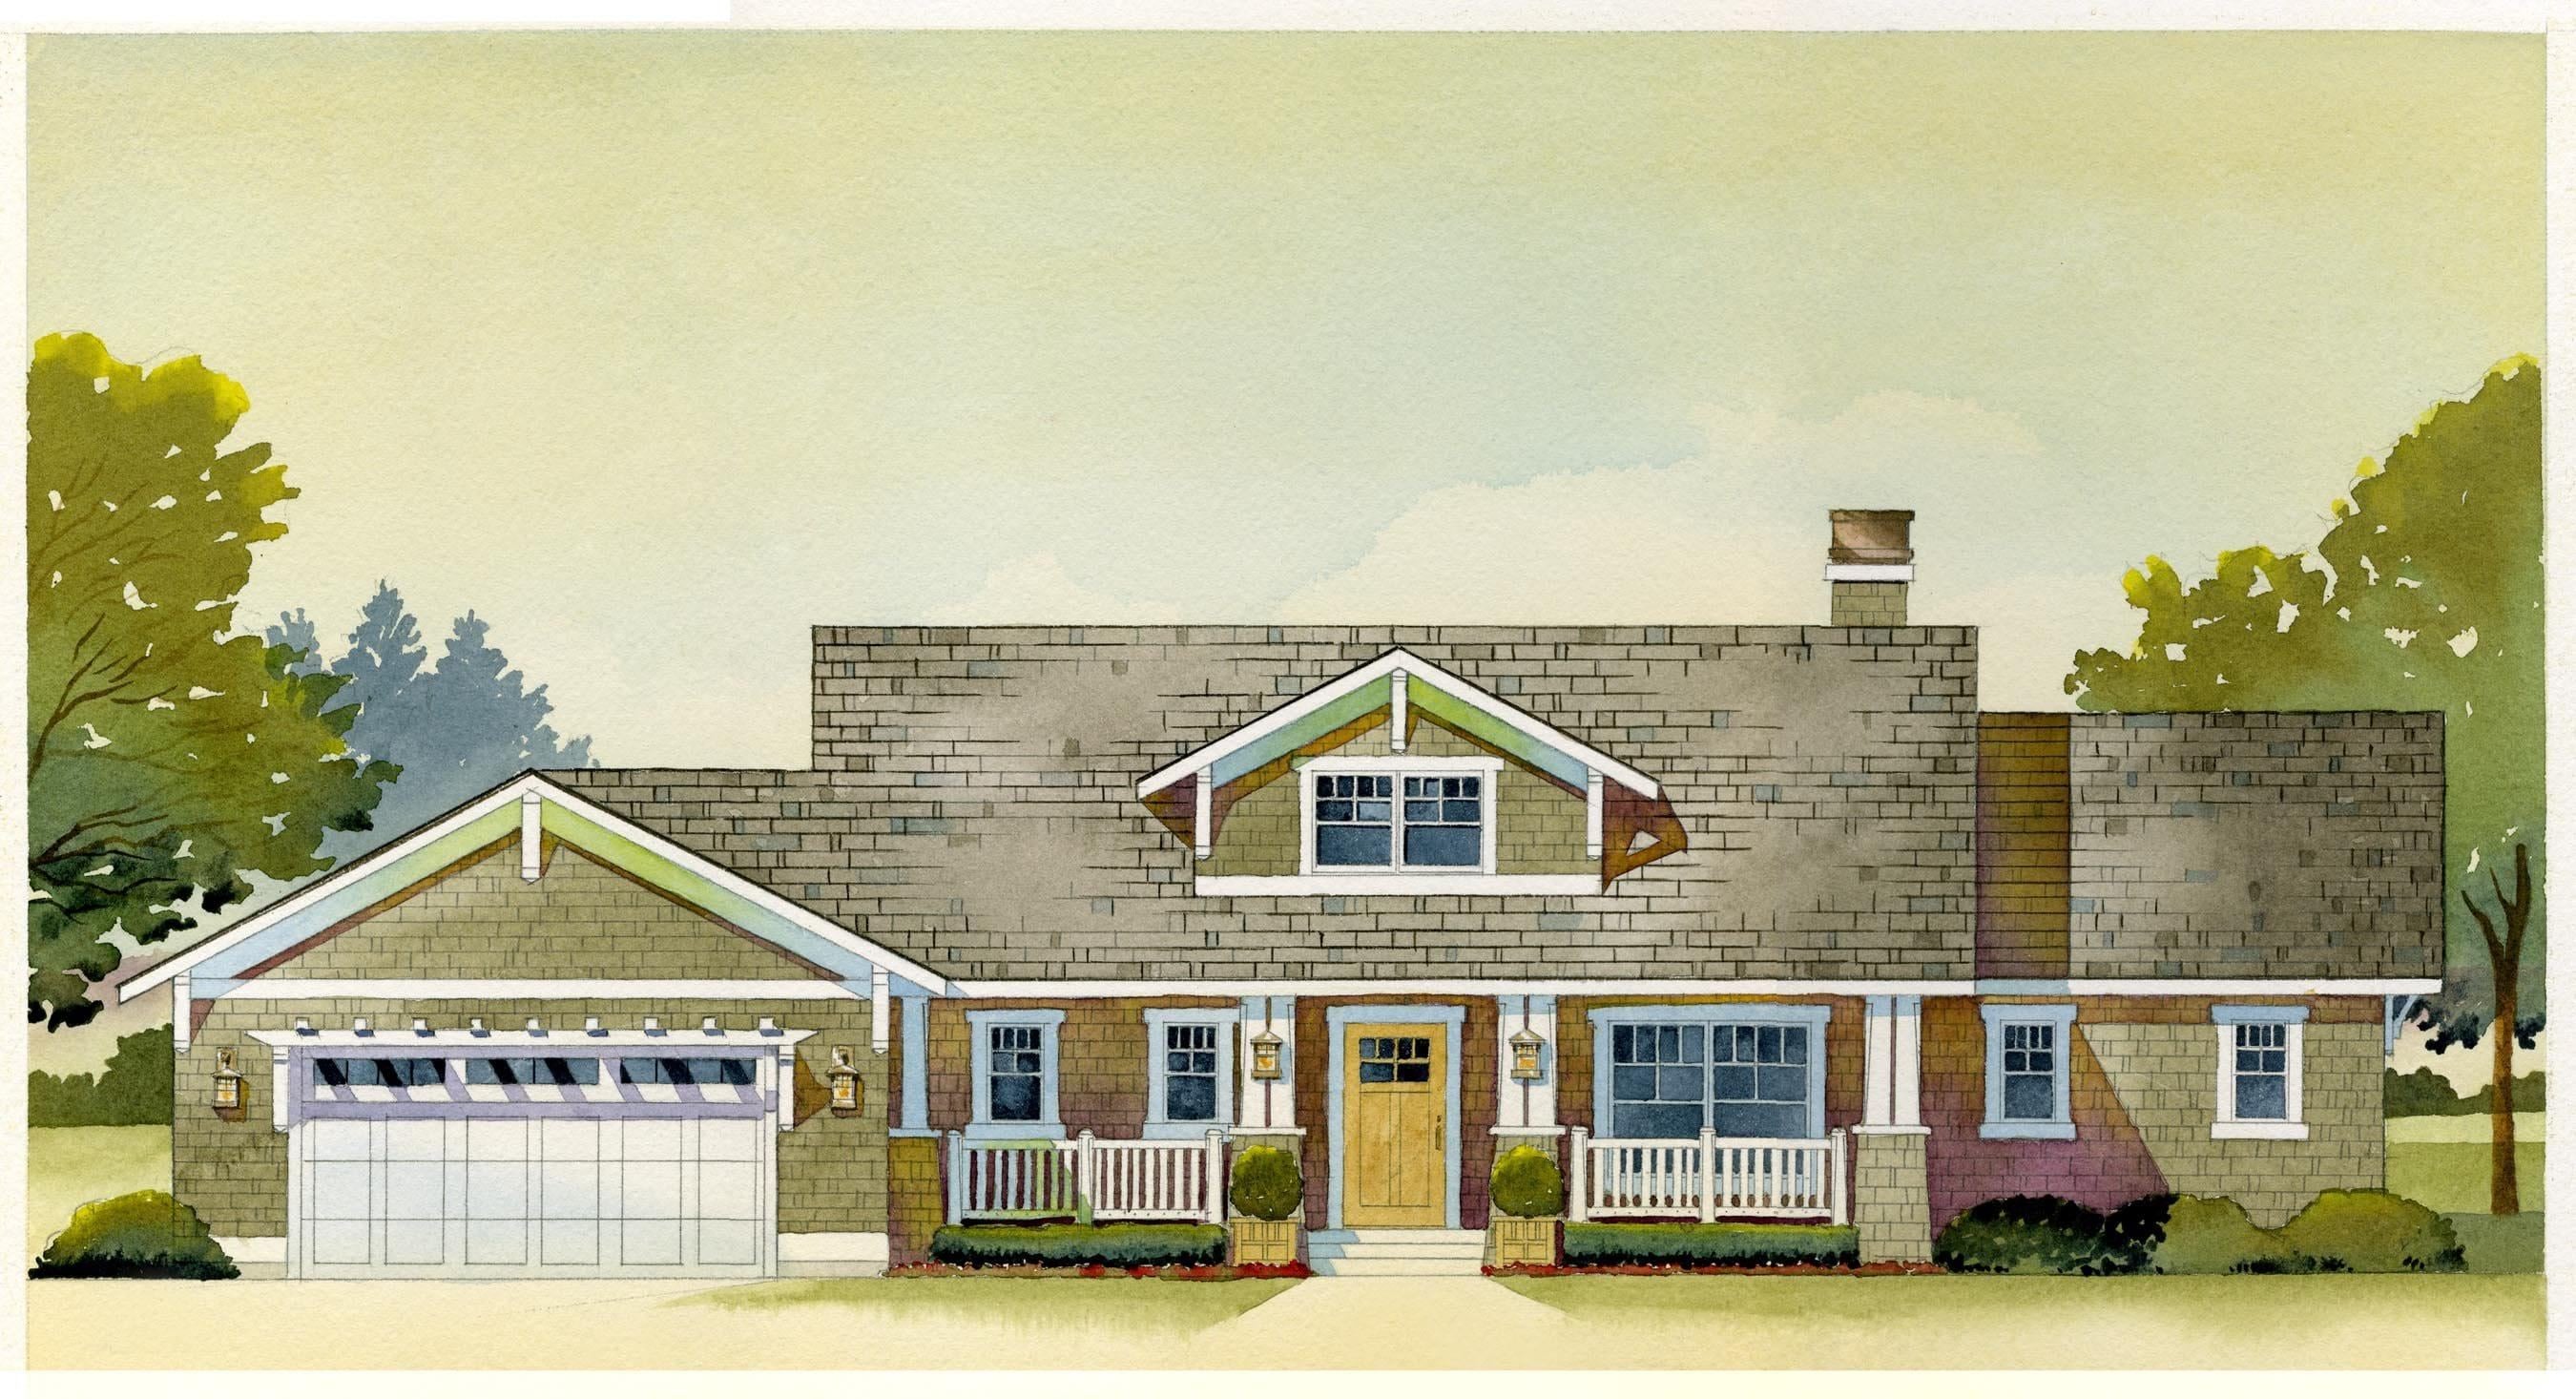 Copperwood - Home Design and Floor Plan - SketchPad House Plans